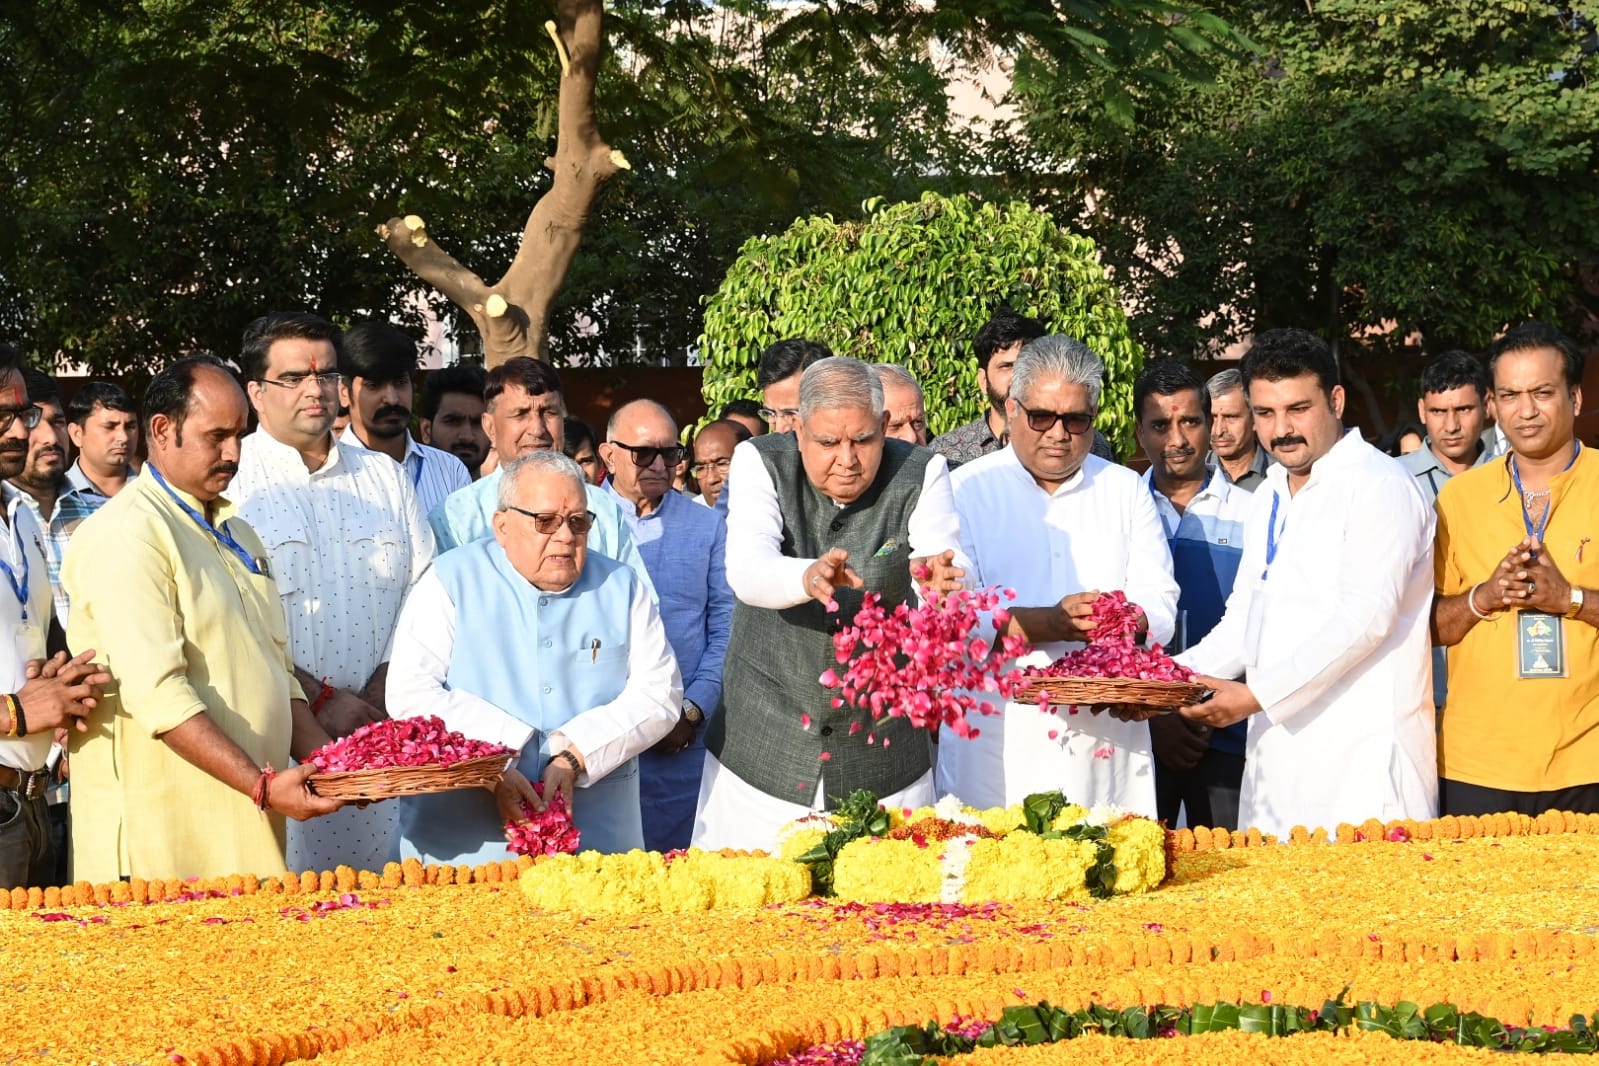 The Vice-President, Shri Jagdeep Dhankhar paying  floral tributes  on the occasion of the birth centenary of former Vice-President, Shri Bhairon Singh Shekhawat, at the 'Shri Bhairon Singh Shekhawat Memorial' in Jaipur, Rajasthan on October 23, 2023.